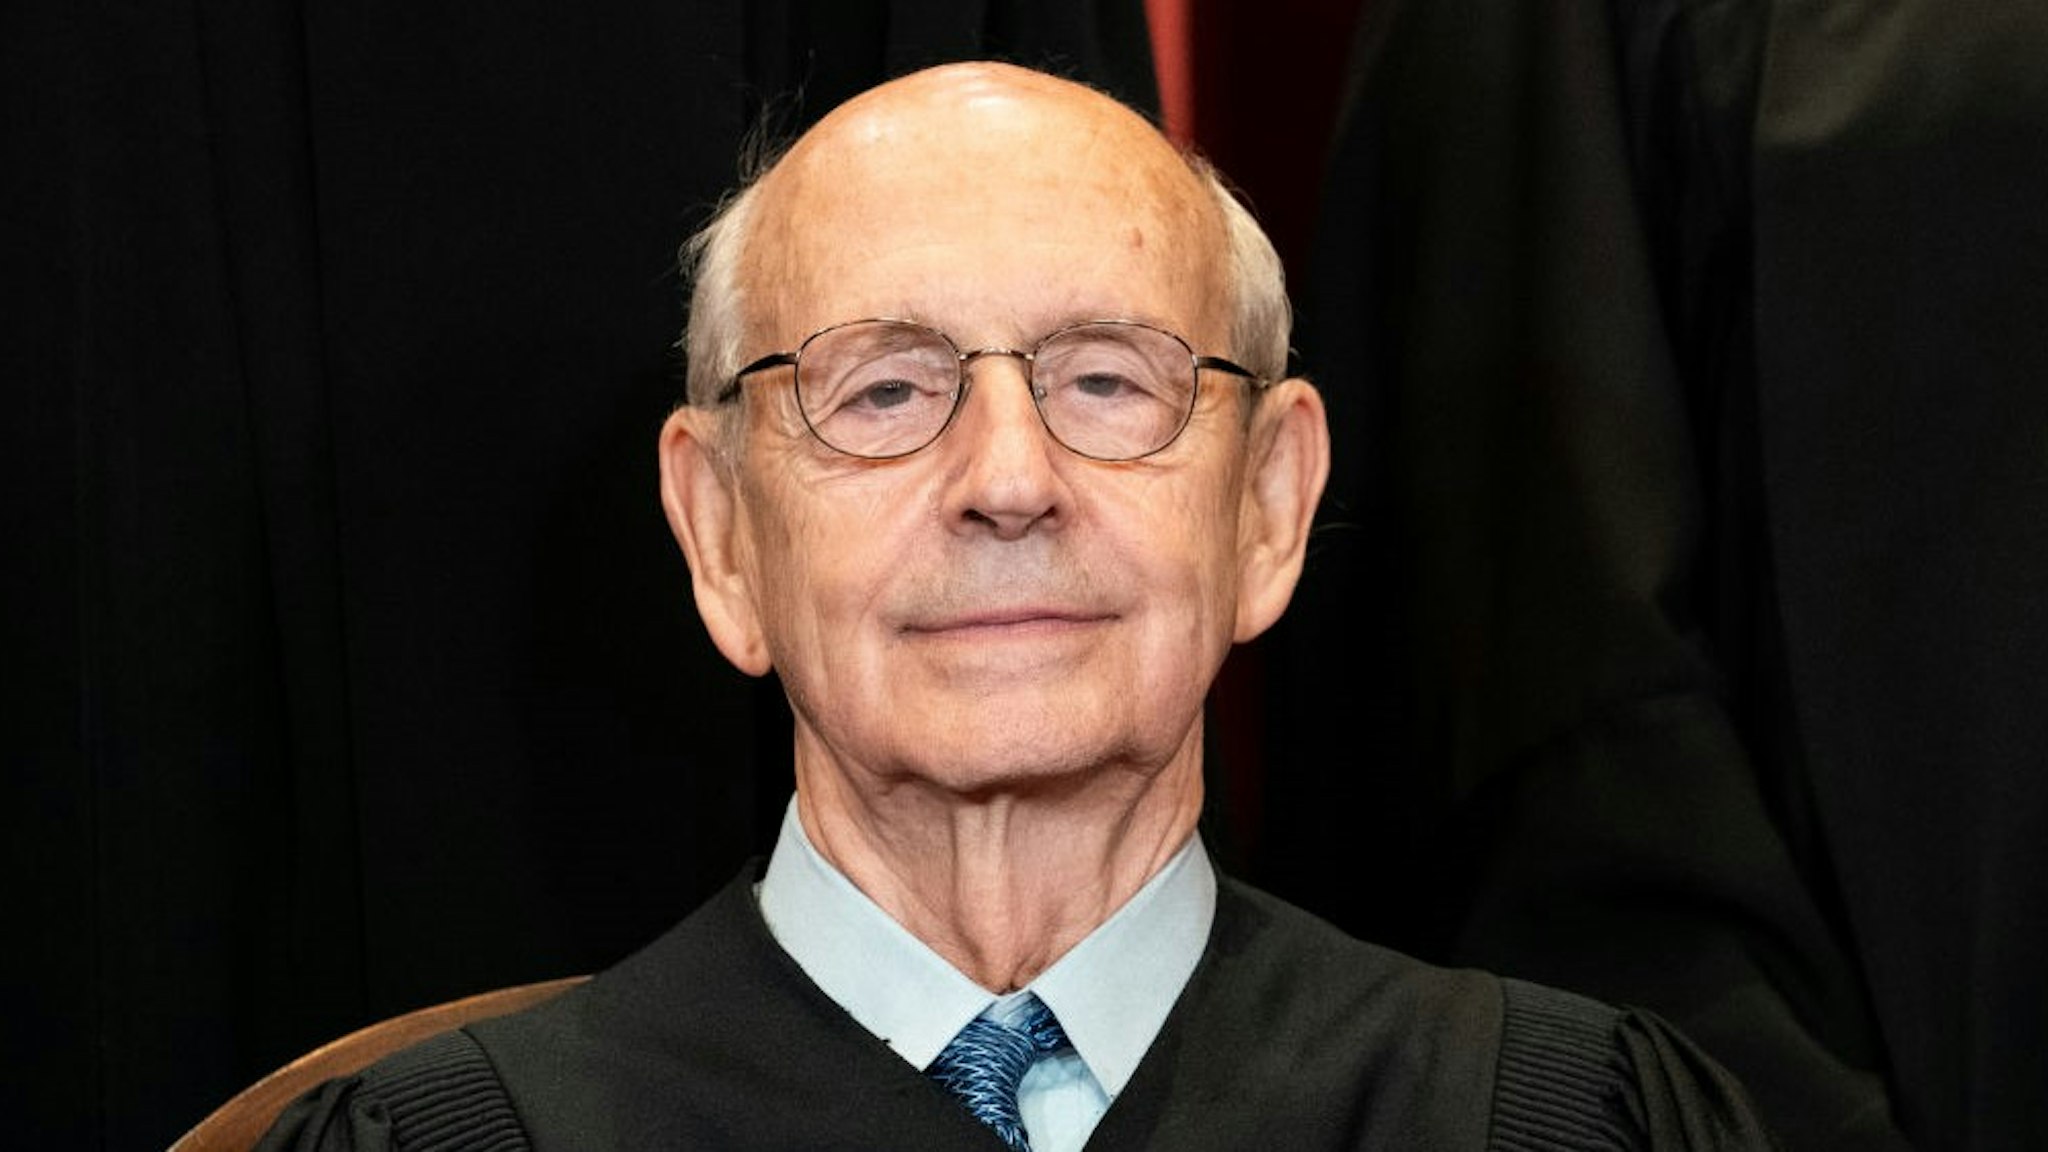 Stephen Breyer, associate justice of the U.S. Supreme Court, during the formal group photograph at the Supreme Court in Washington, D.C., U.S., on Friday, April 23, 2021. Amy Coney Barrett's confirmation by the Senate last year was a touchstone accomplishment for Donald Trump and congressional Republicans that solidified a 6-3 conservative majority on the court just eight days before the U.S. held its presidential election. Photographer: